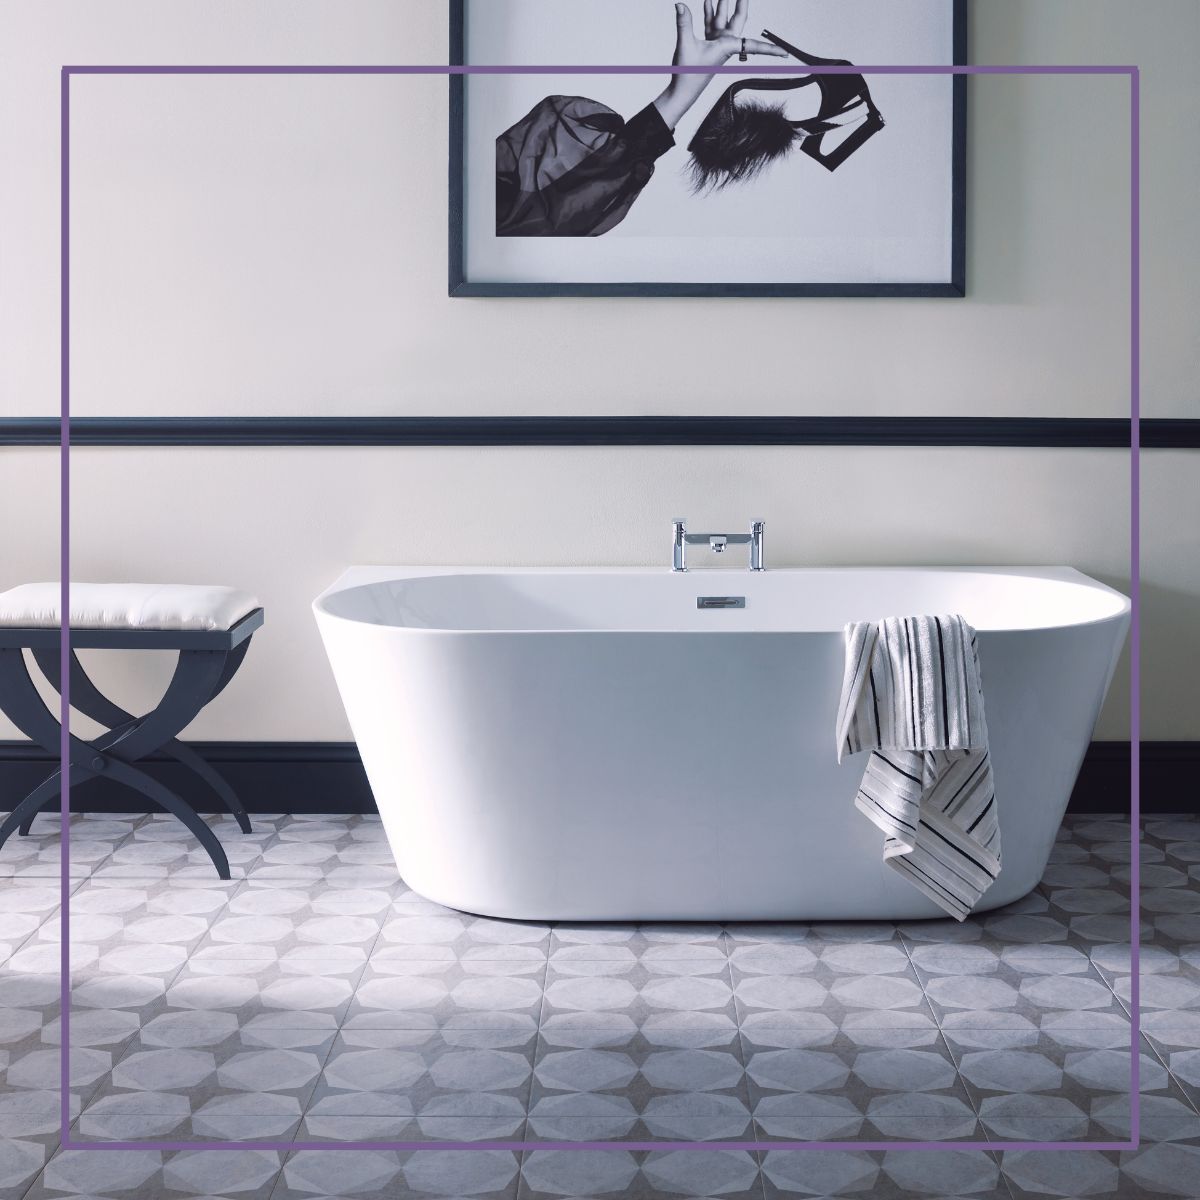 Bathroom blues got you down? Transform your space into a spa sanctuary with the Colwyn freestanding bath. Spacious enough for two (wink wink ), it's pure luxury at your fingertips. #BathTubGoals #BathingSensation #SelfCareHaven #BathroomUpgrade #DreamBathroom #SundaySoak